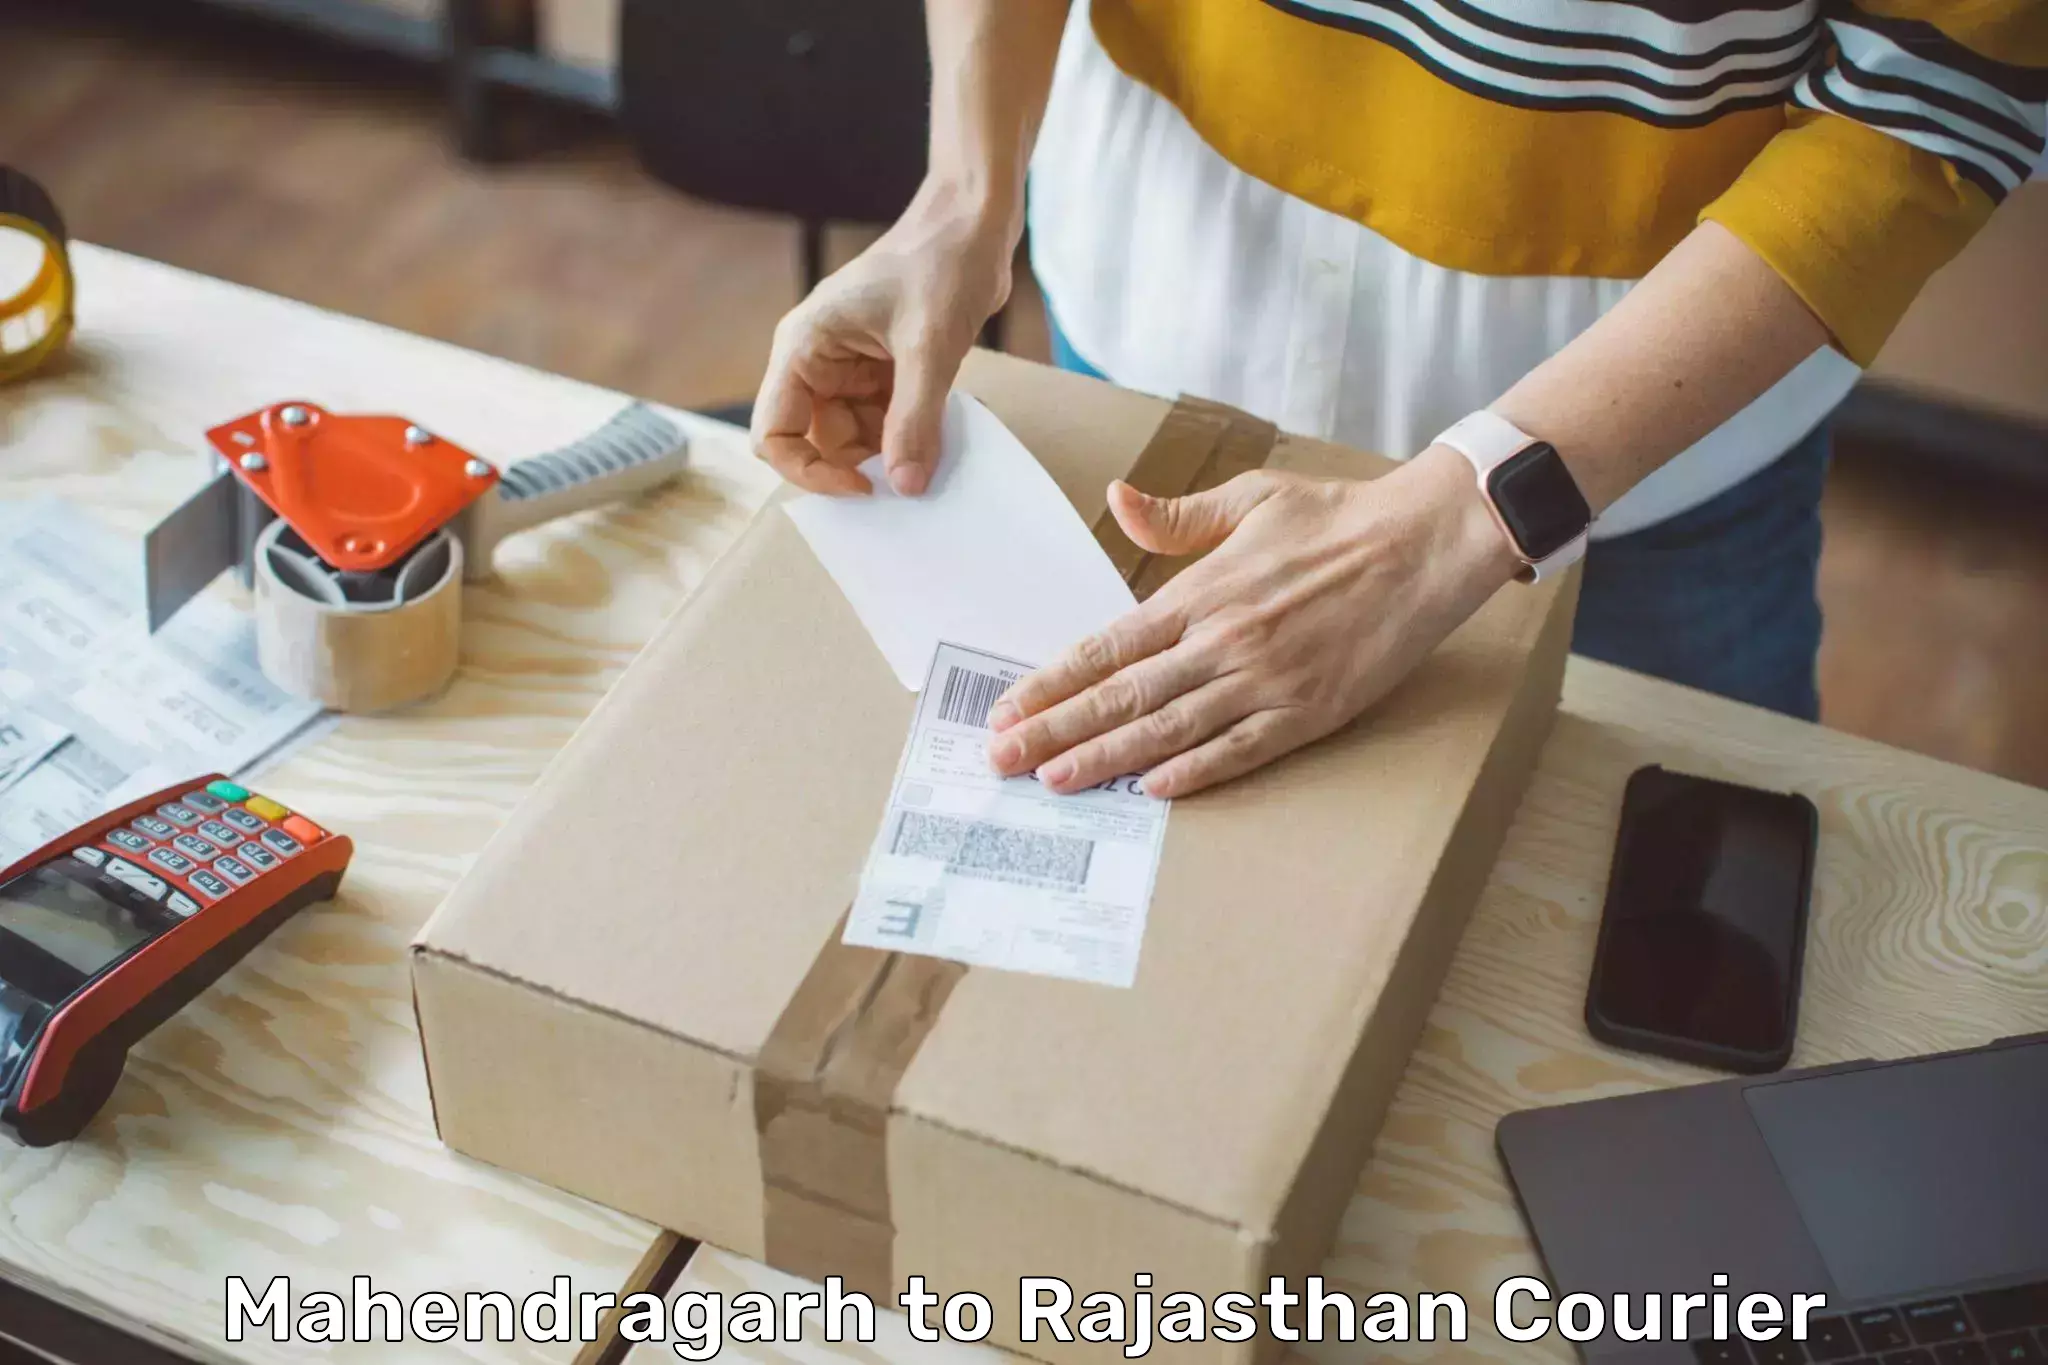 On-call courier service Mahendragarh to Rajasthan